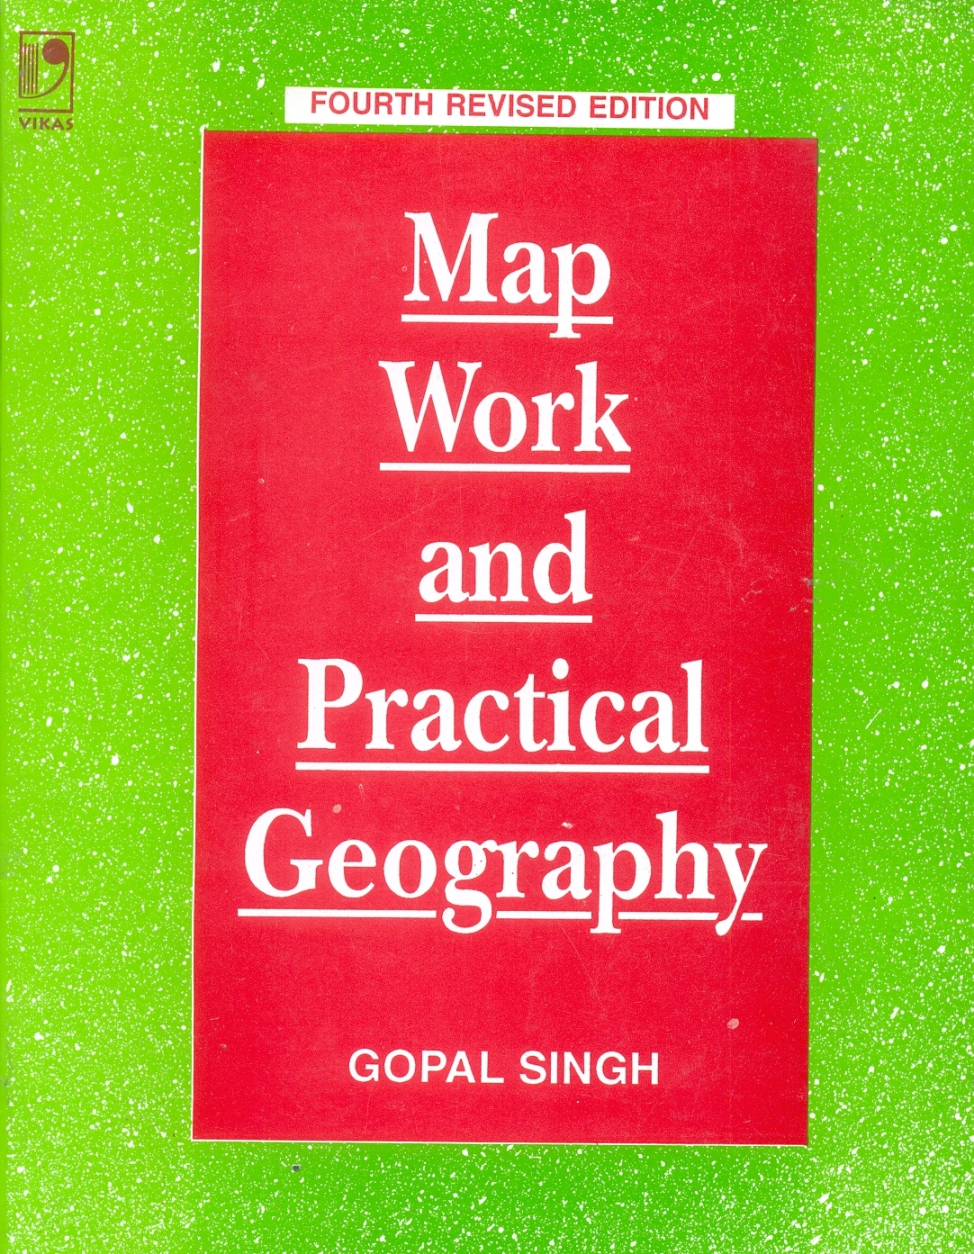 Map Work and Practical Geography